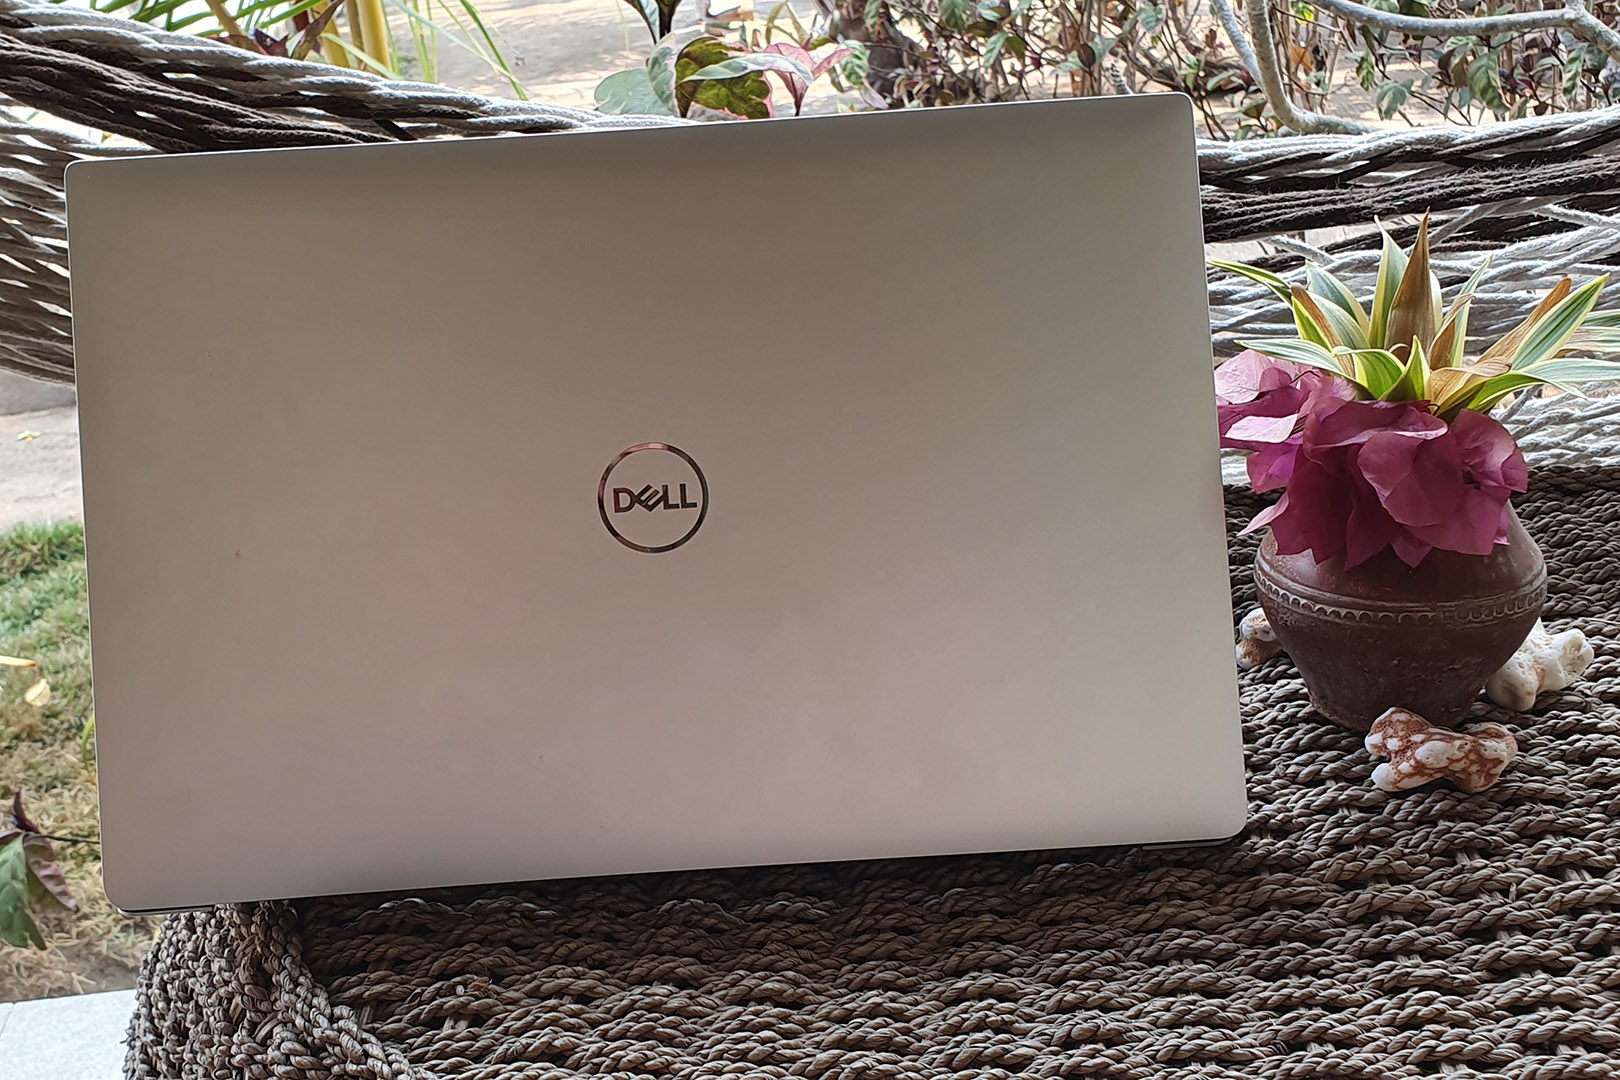 Dell_XPS15_01